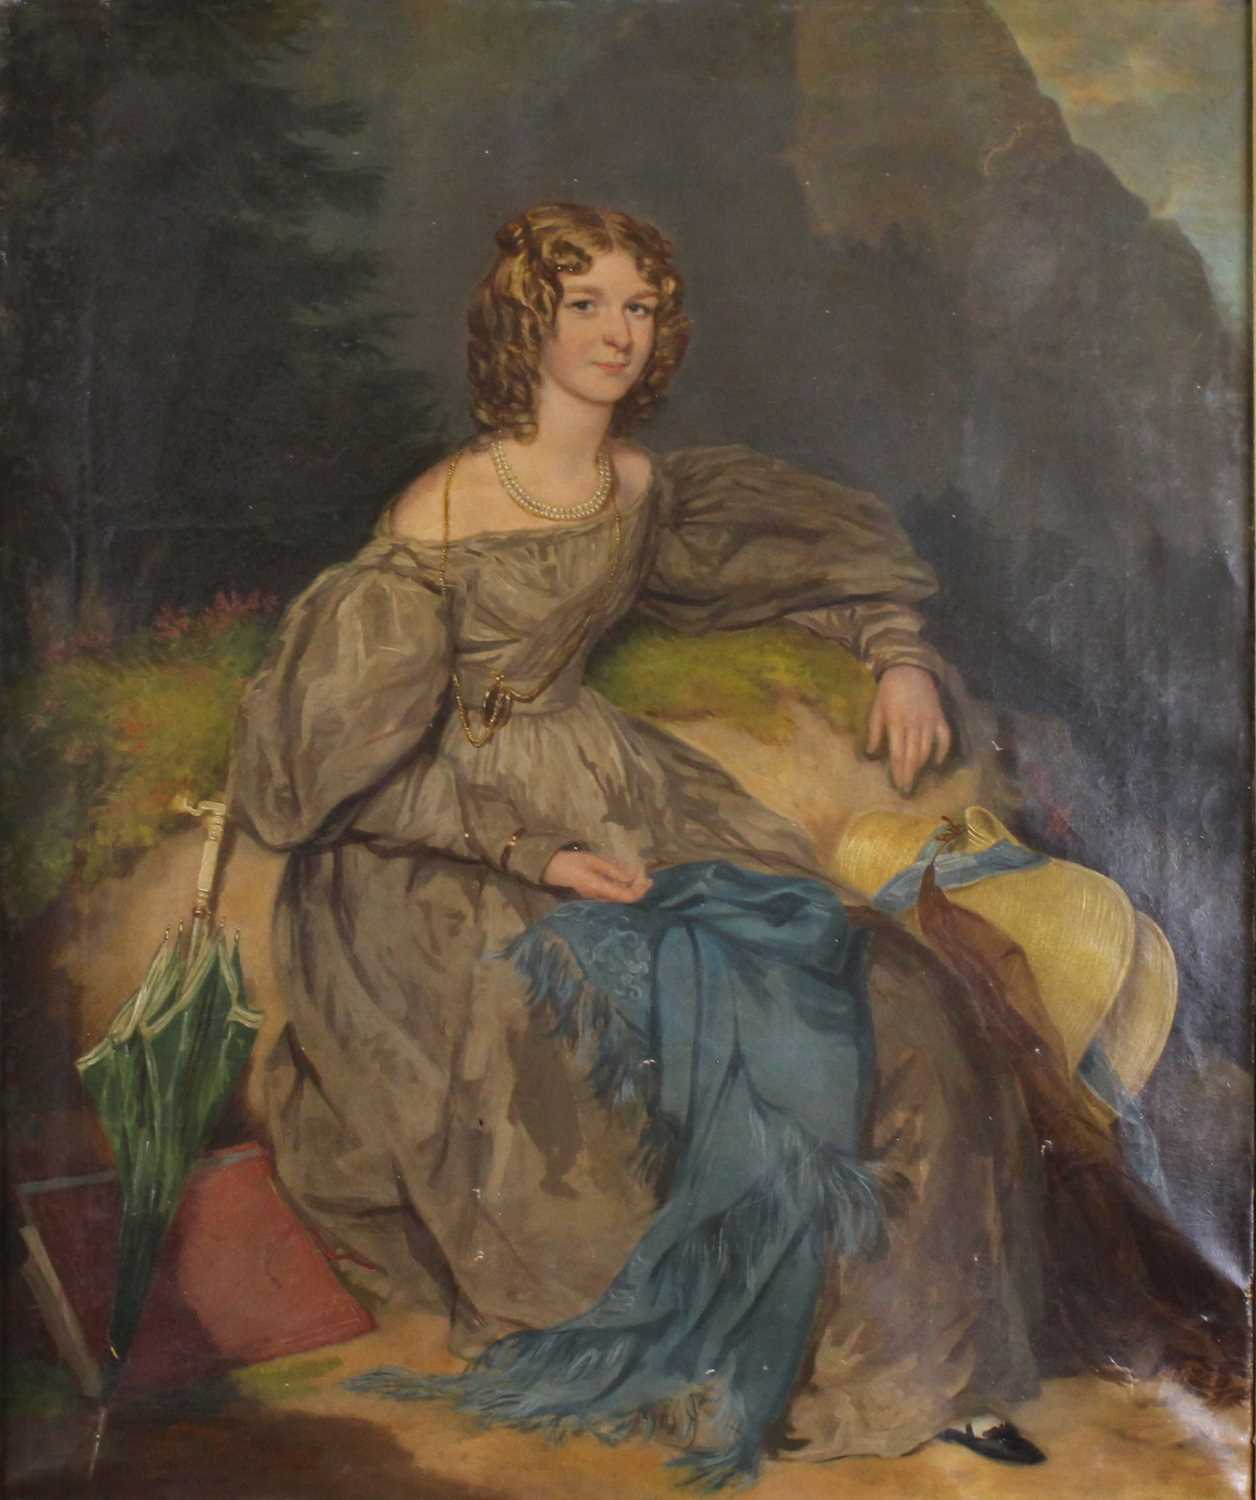 Late 19th century English school - full-length portrait of a young woman in a mountain landscape,